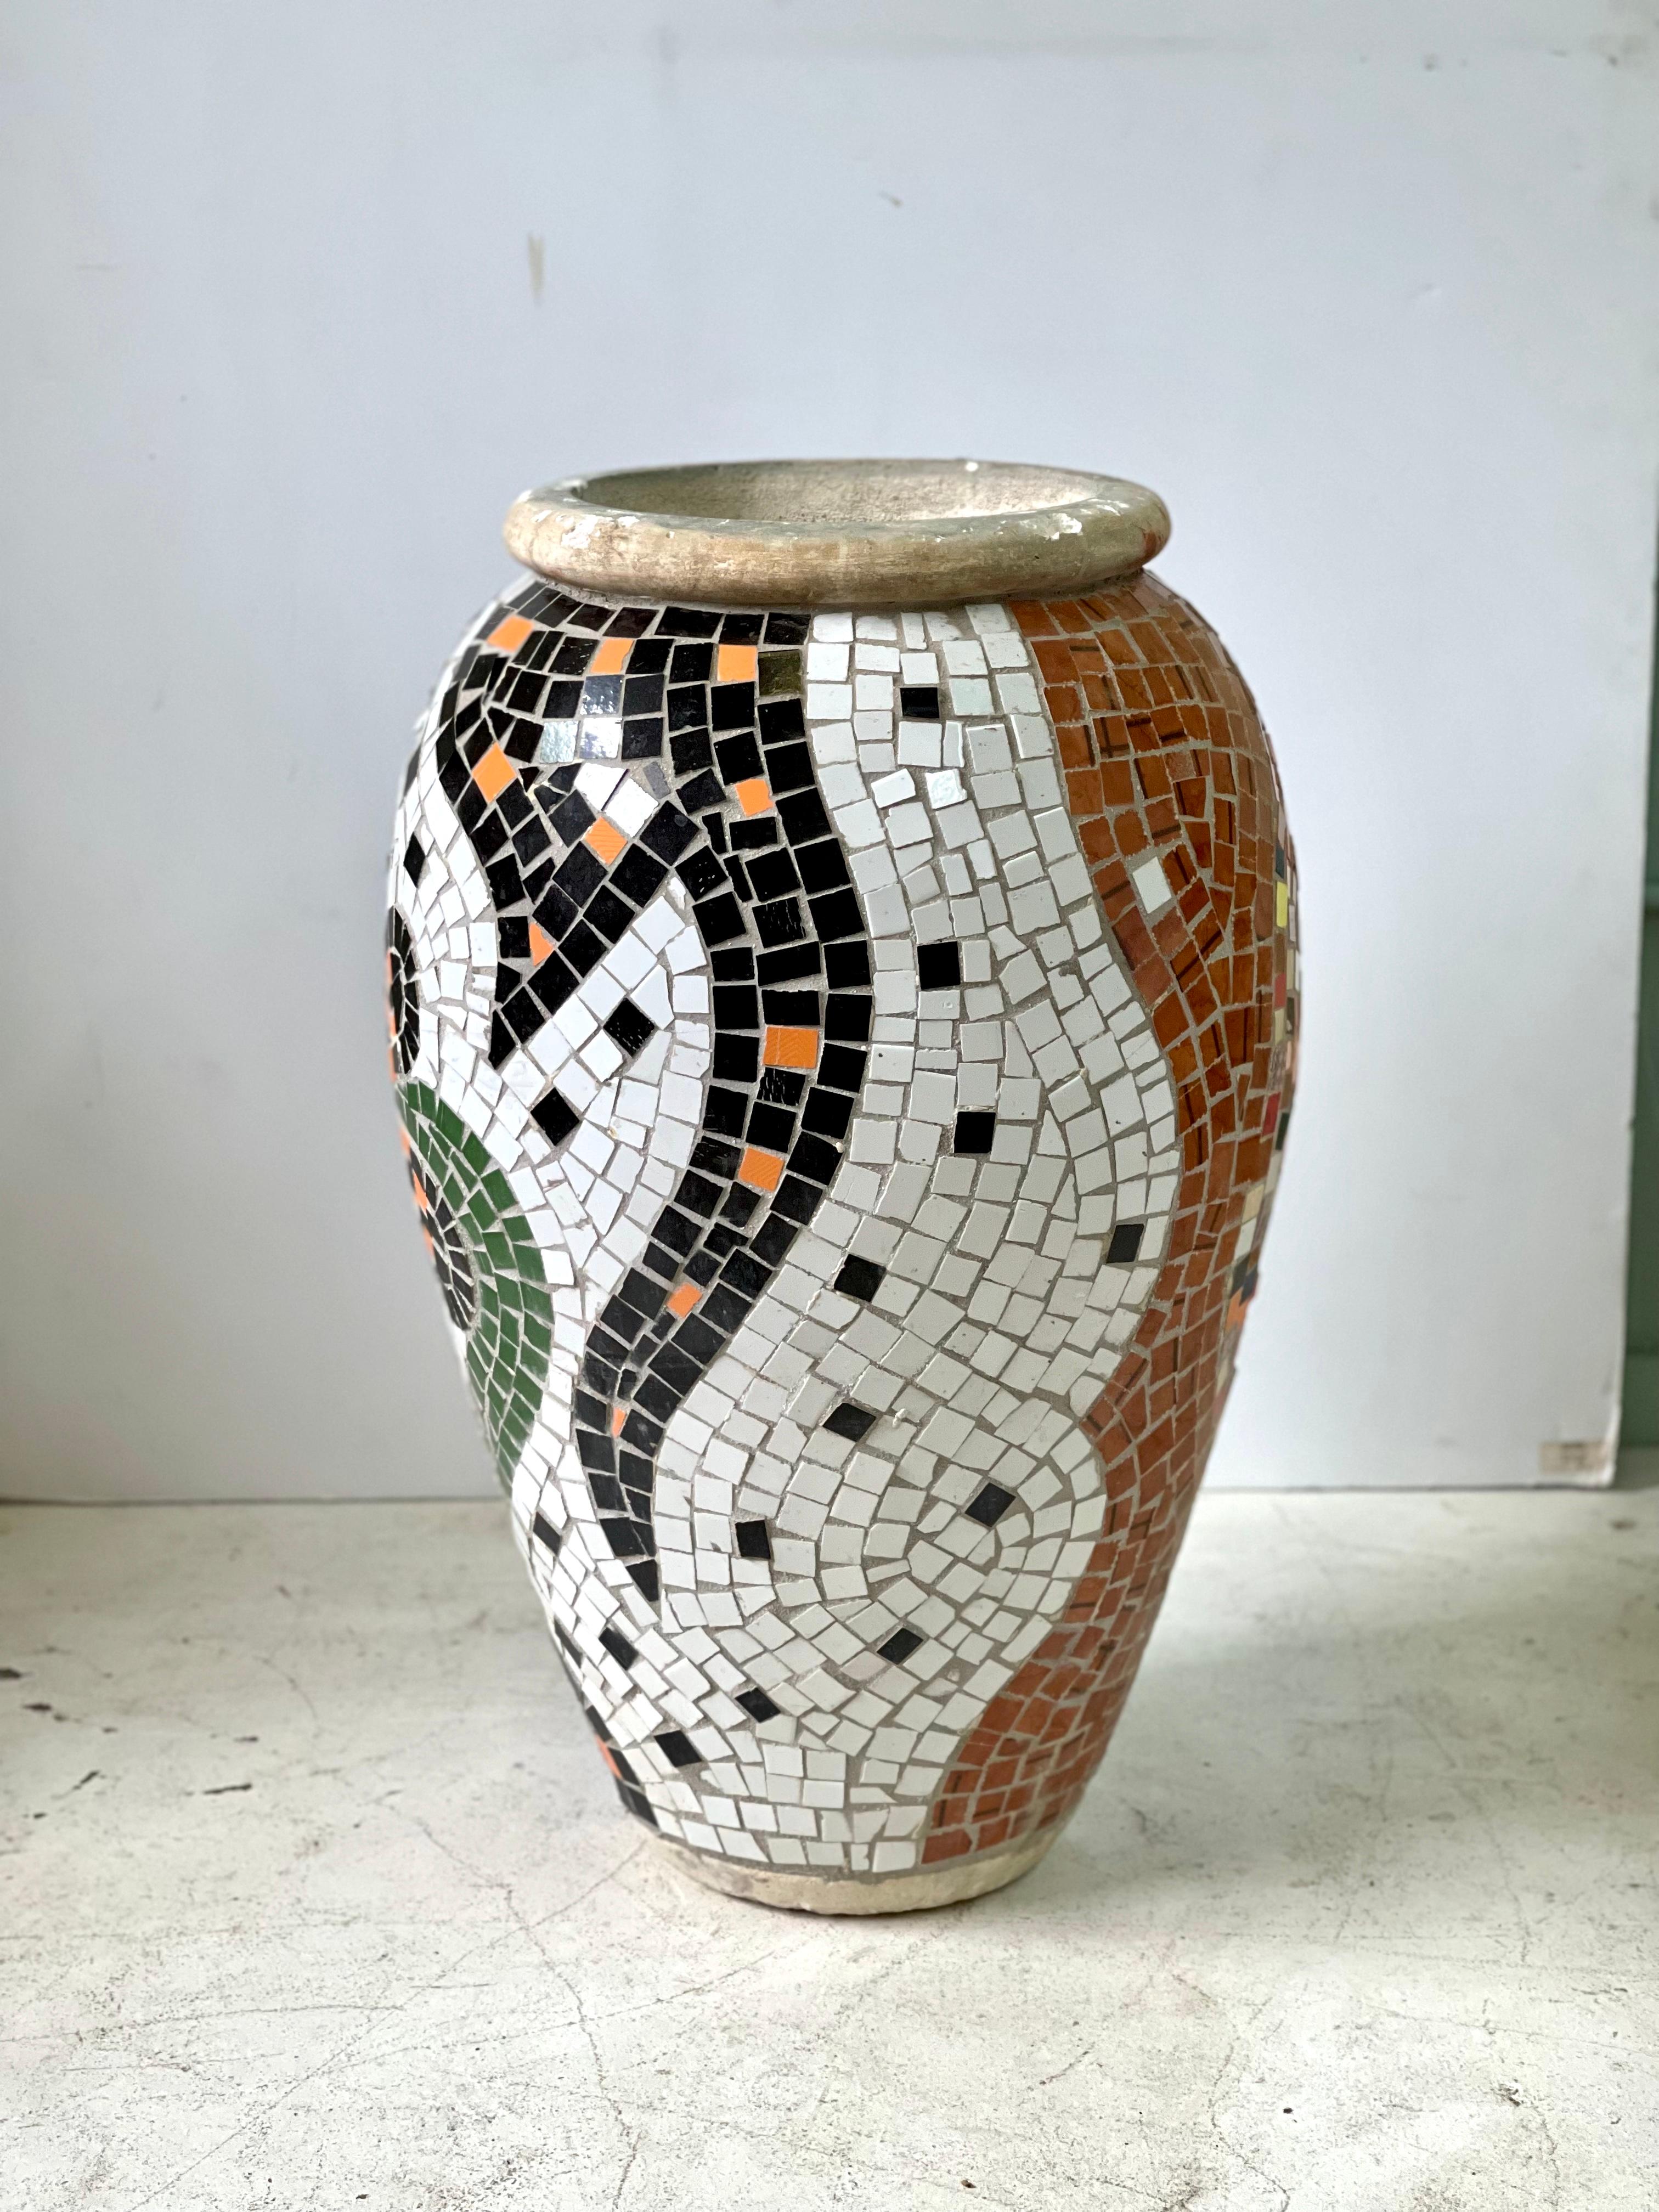 This is a wonderful 20th Century large mosaic urn-shaped planter from the Mediterranean region. It is handcrafted from ceramic tiles set into concrete having a black and white floral design on one side and polychrome tiles weaving through terracotta